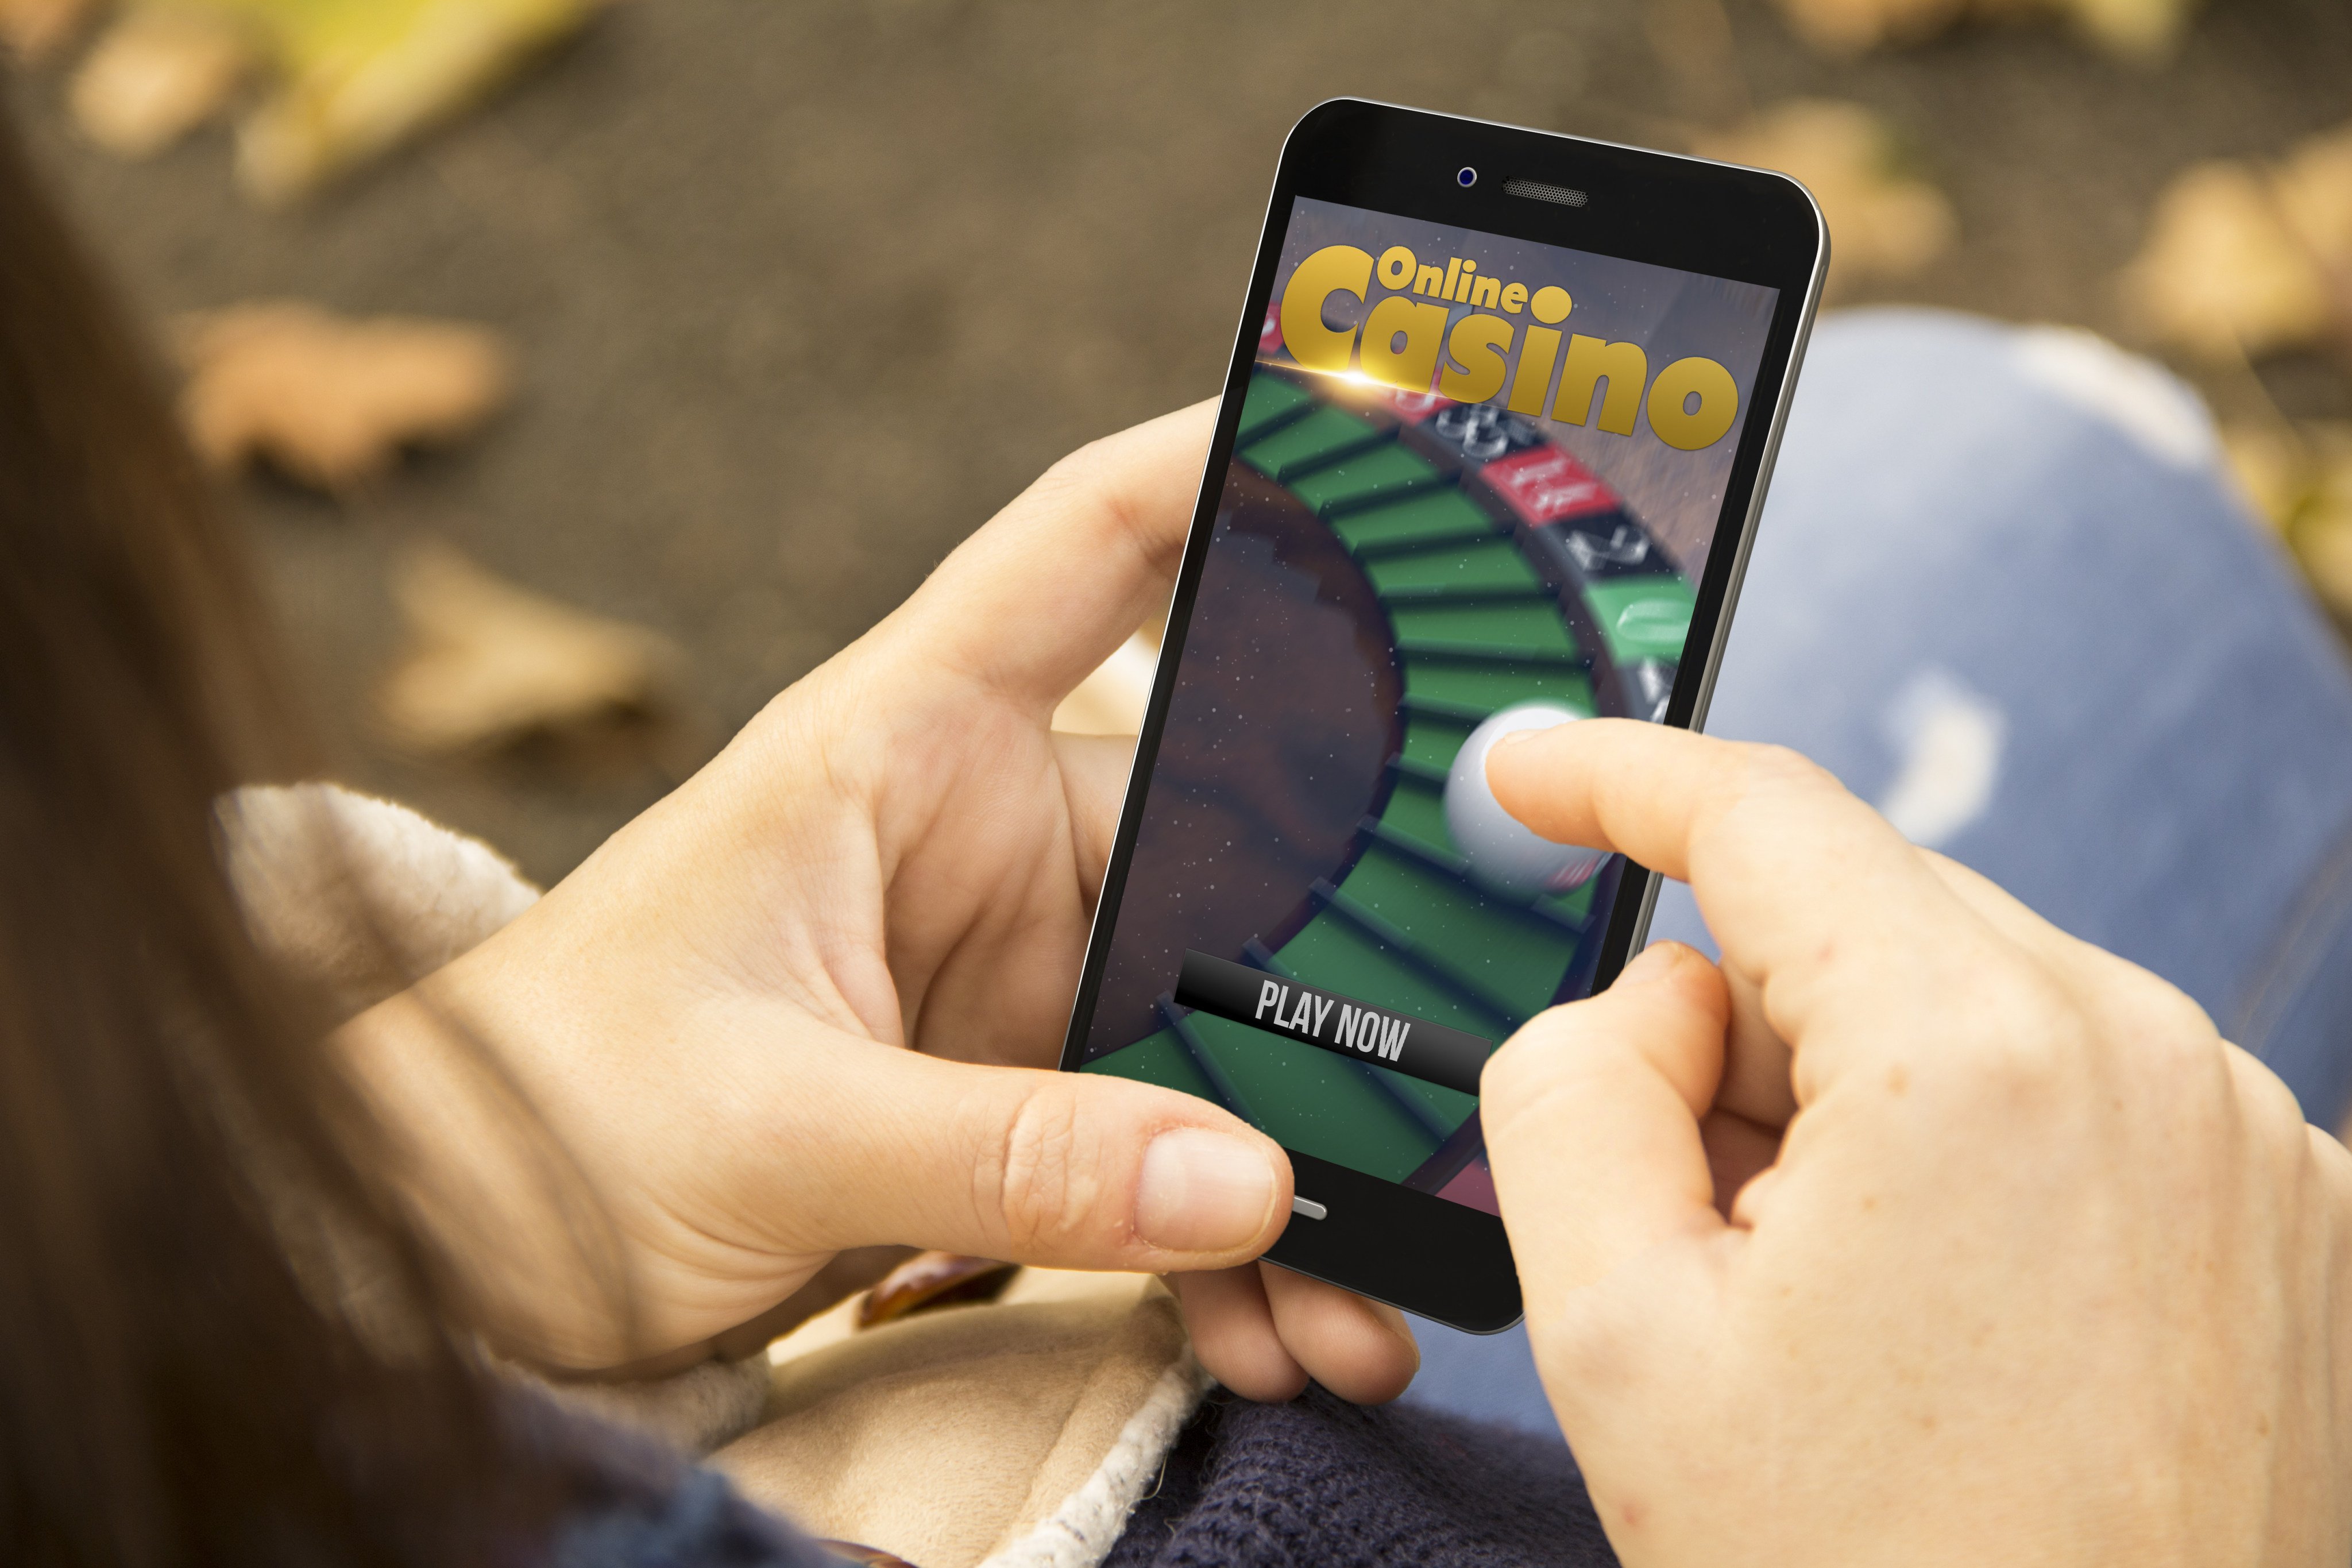 Simulated gambling games often employed tactics to entice players to make in-app purchases, the consumer watchdog says. Photo: Shutterstock